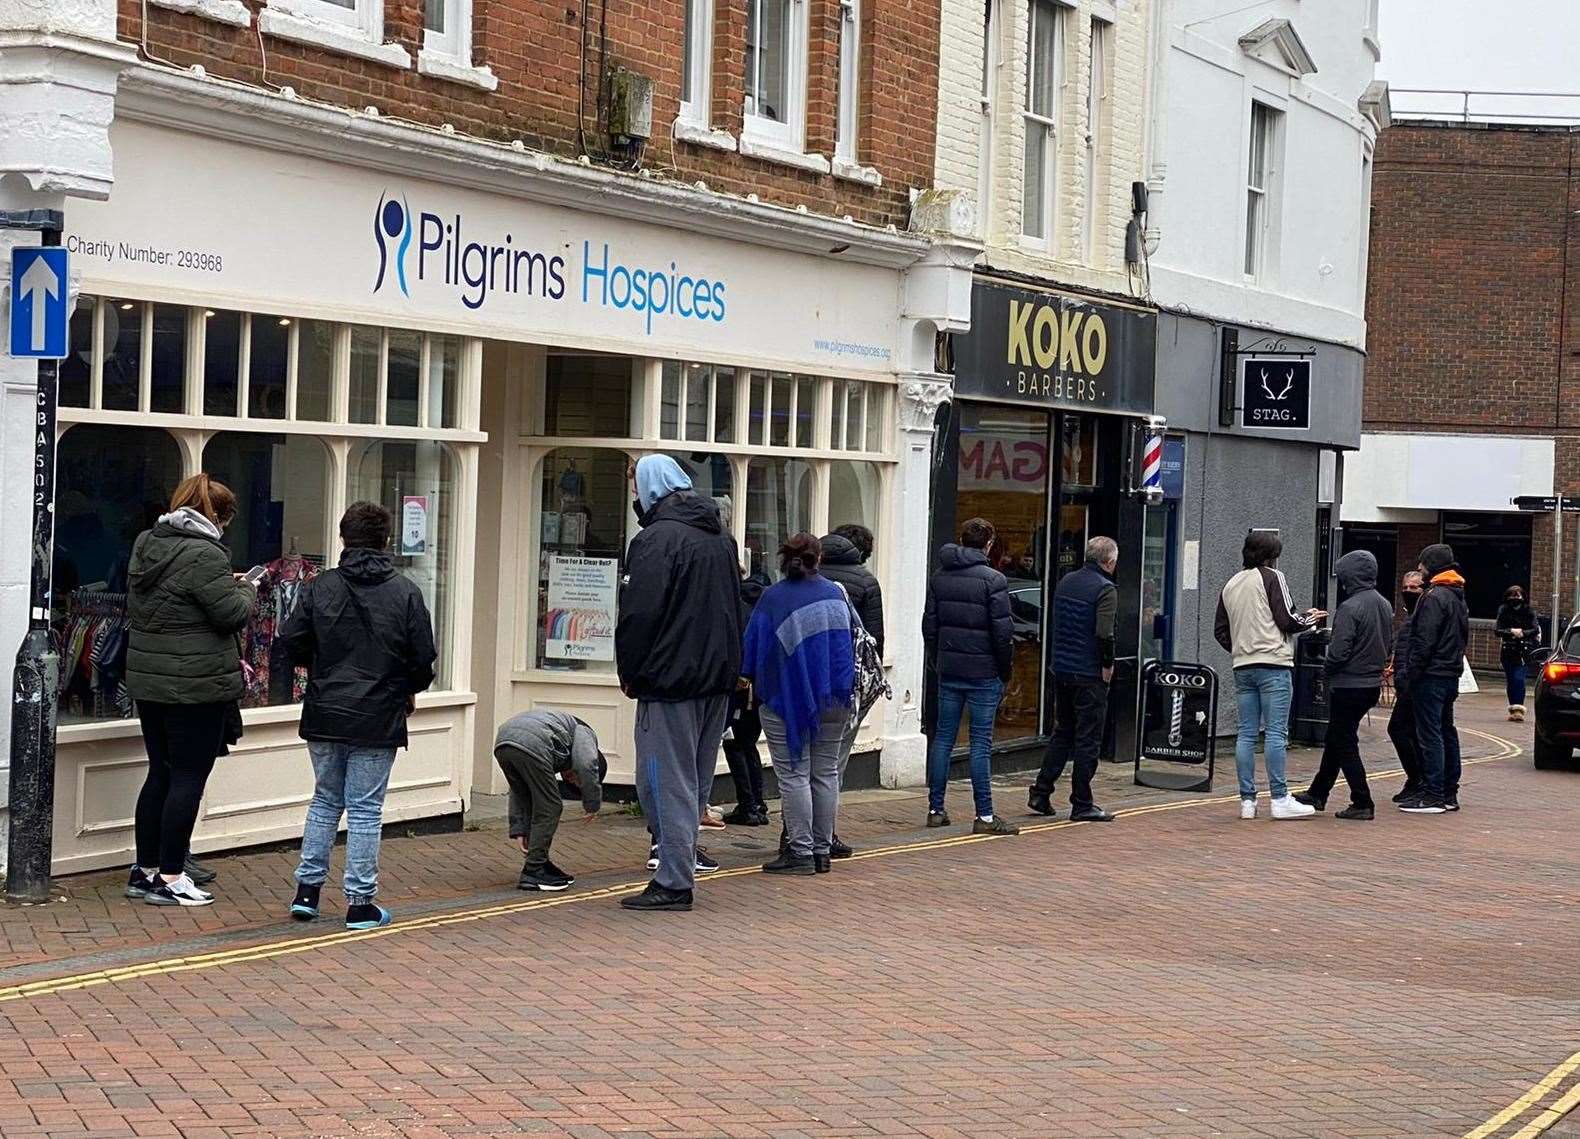 Even before 9am, queues were forming outside barbers in the town centre